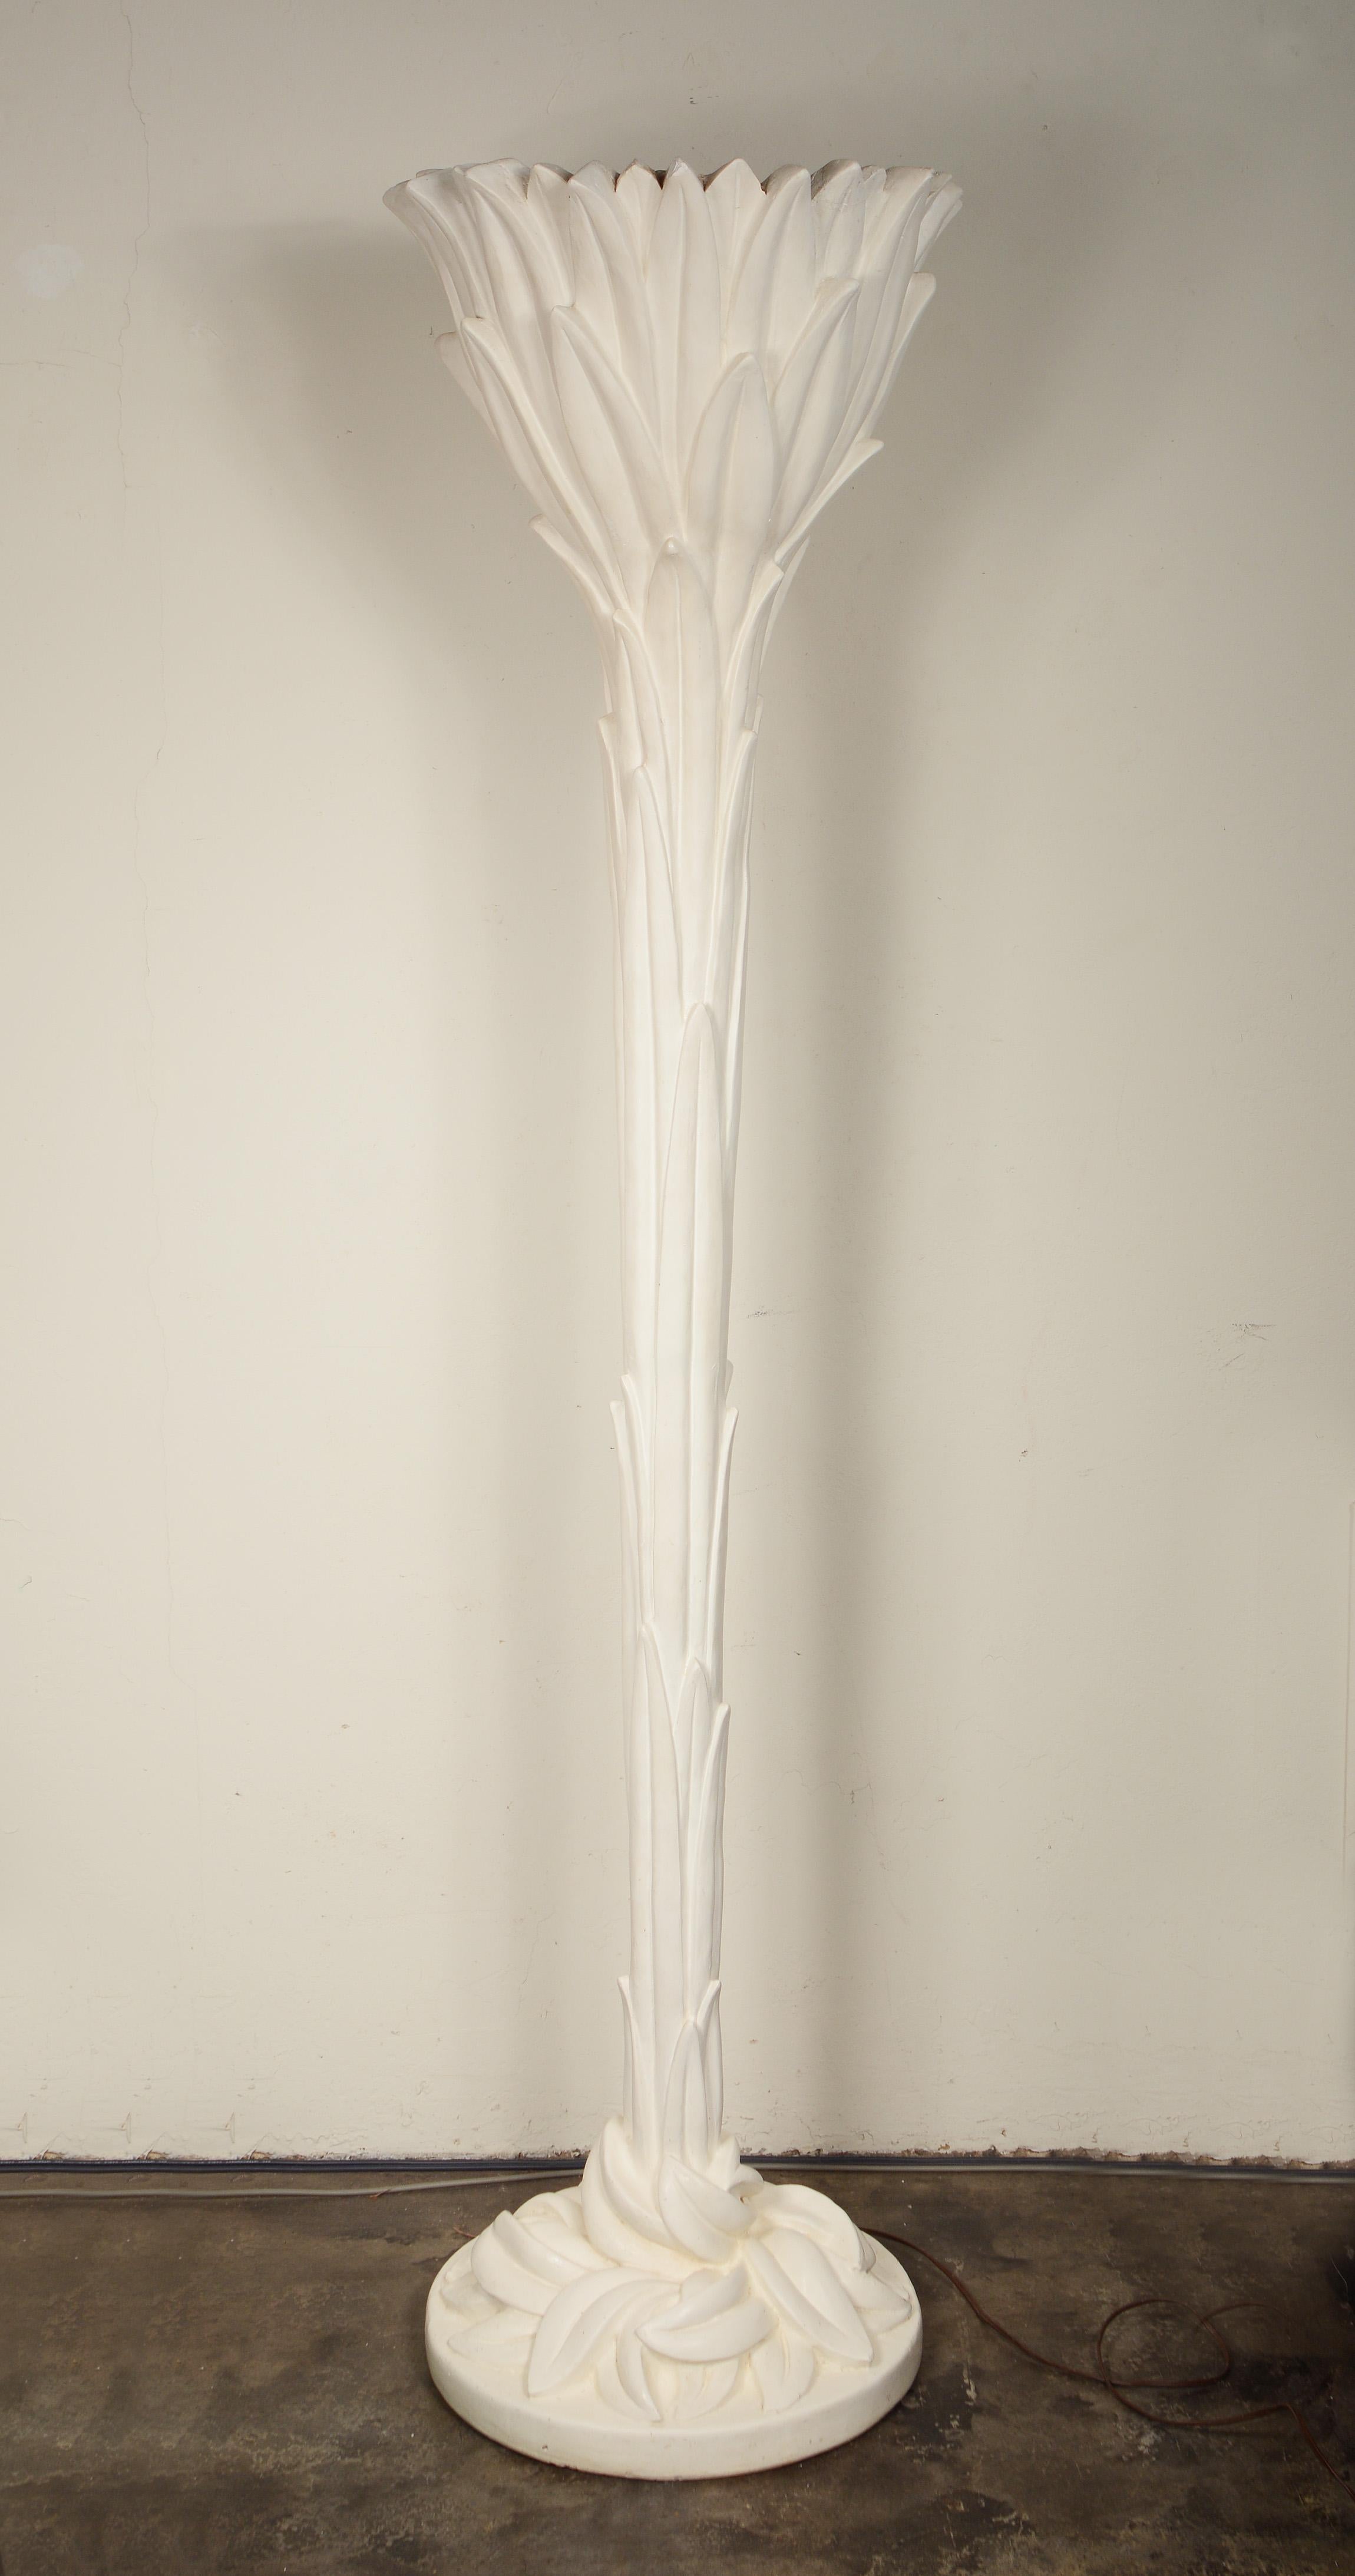 Plaster plant form floor lamp in the style of Serge Roche. This lamp has great fluid lines and is one the better proportioned of this style. The lamp has a couple of chips to the leaf tips on the top rim. One large one and a smaller one. A few of